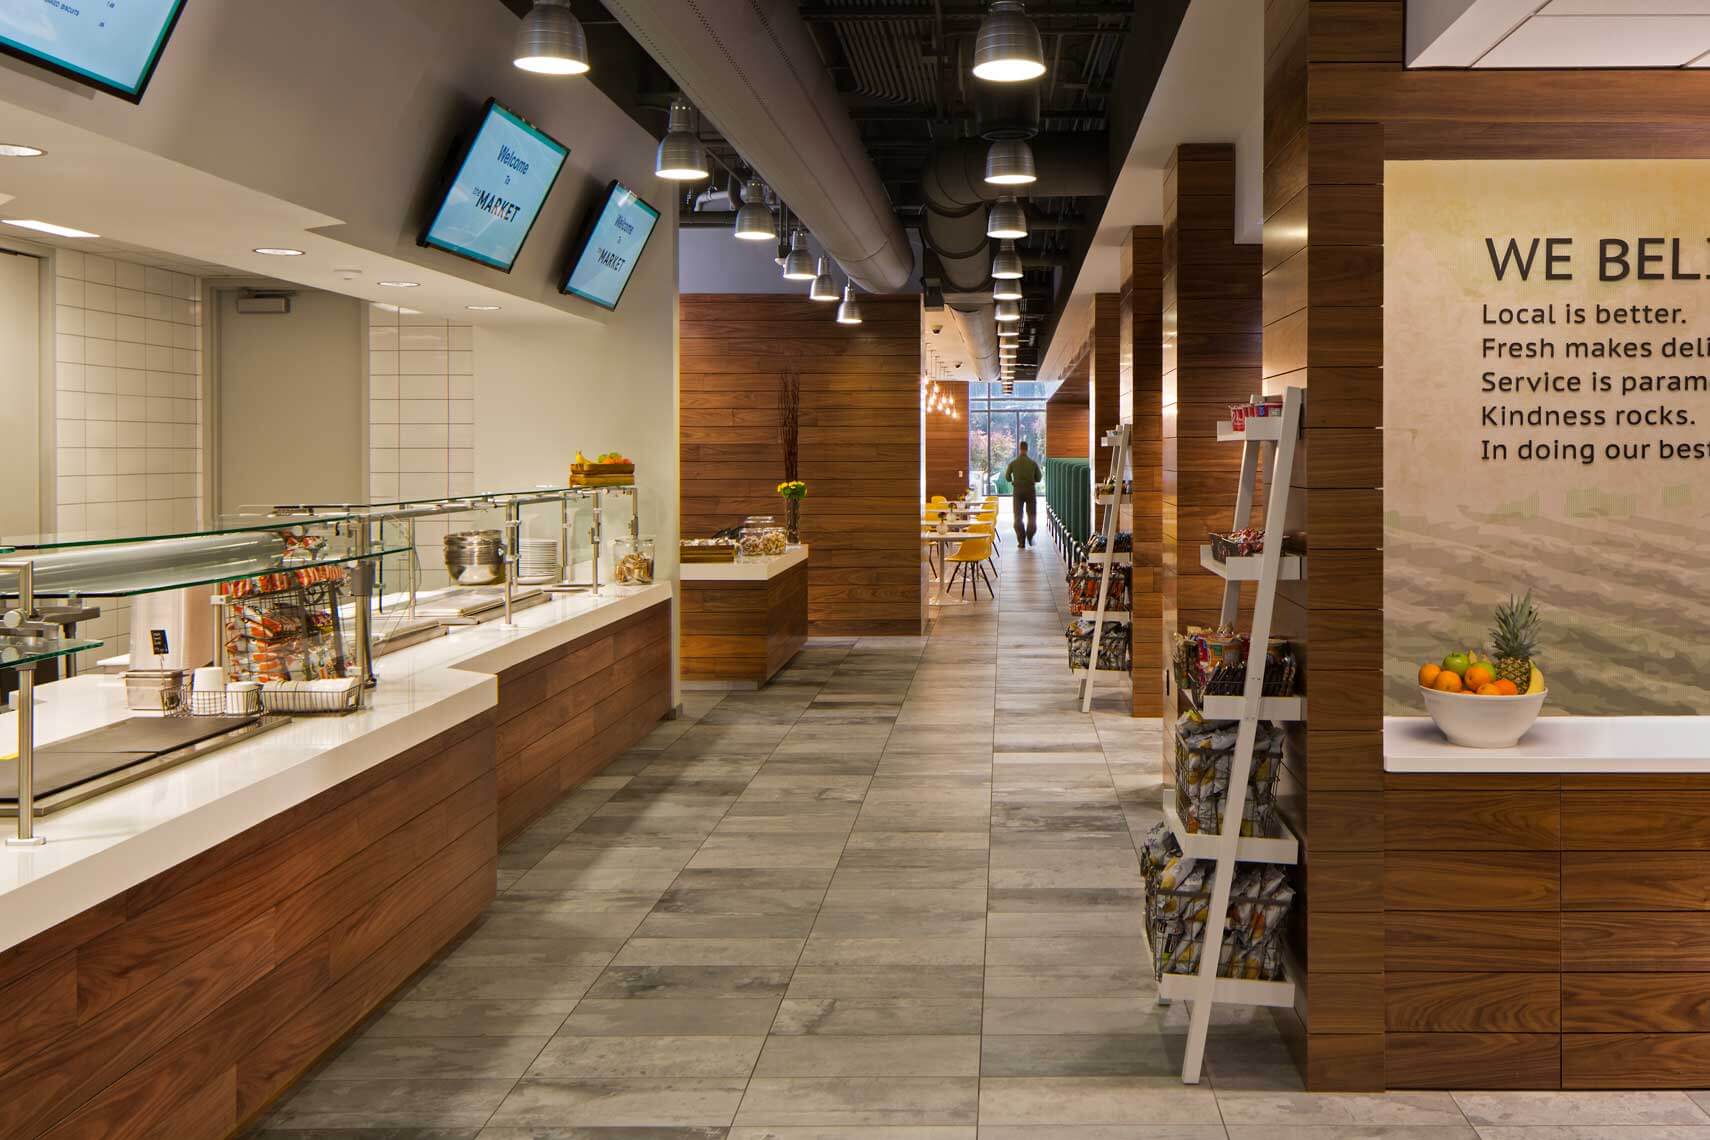 A view of the pleasantly designed servery within a corporate client’s headquarters